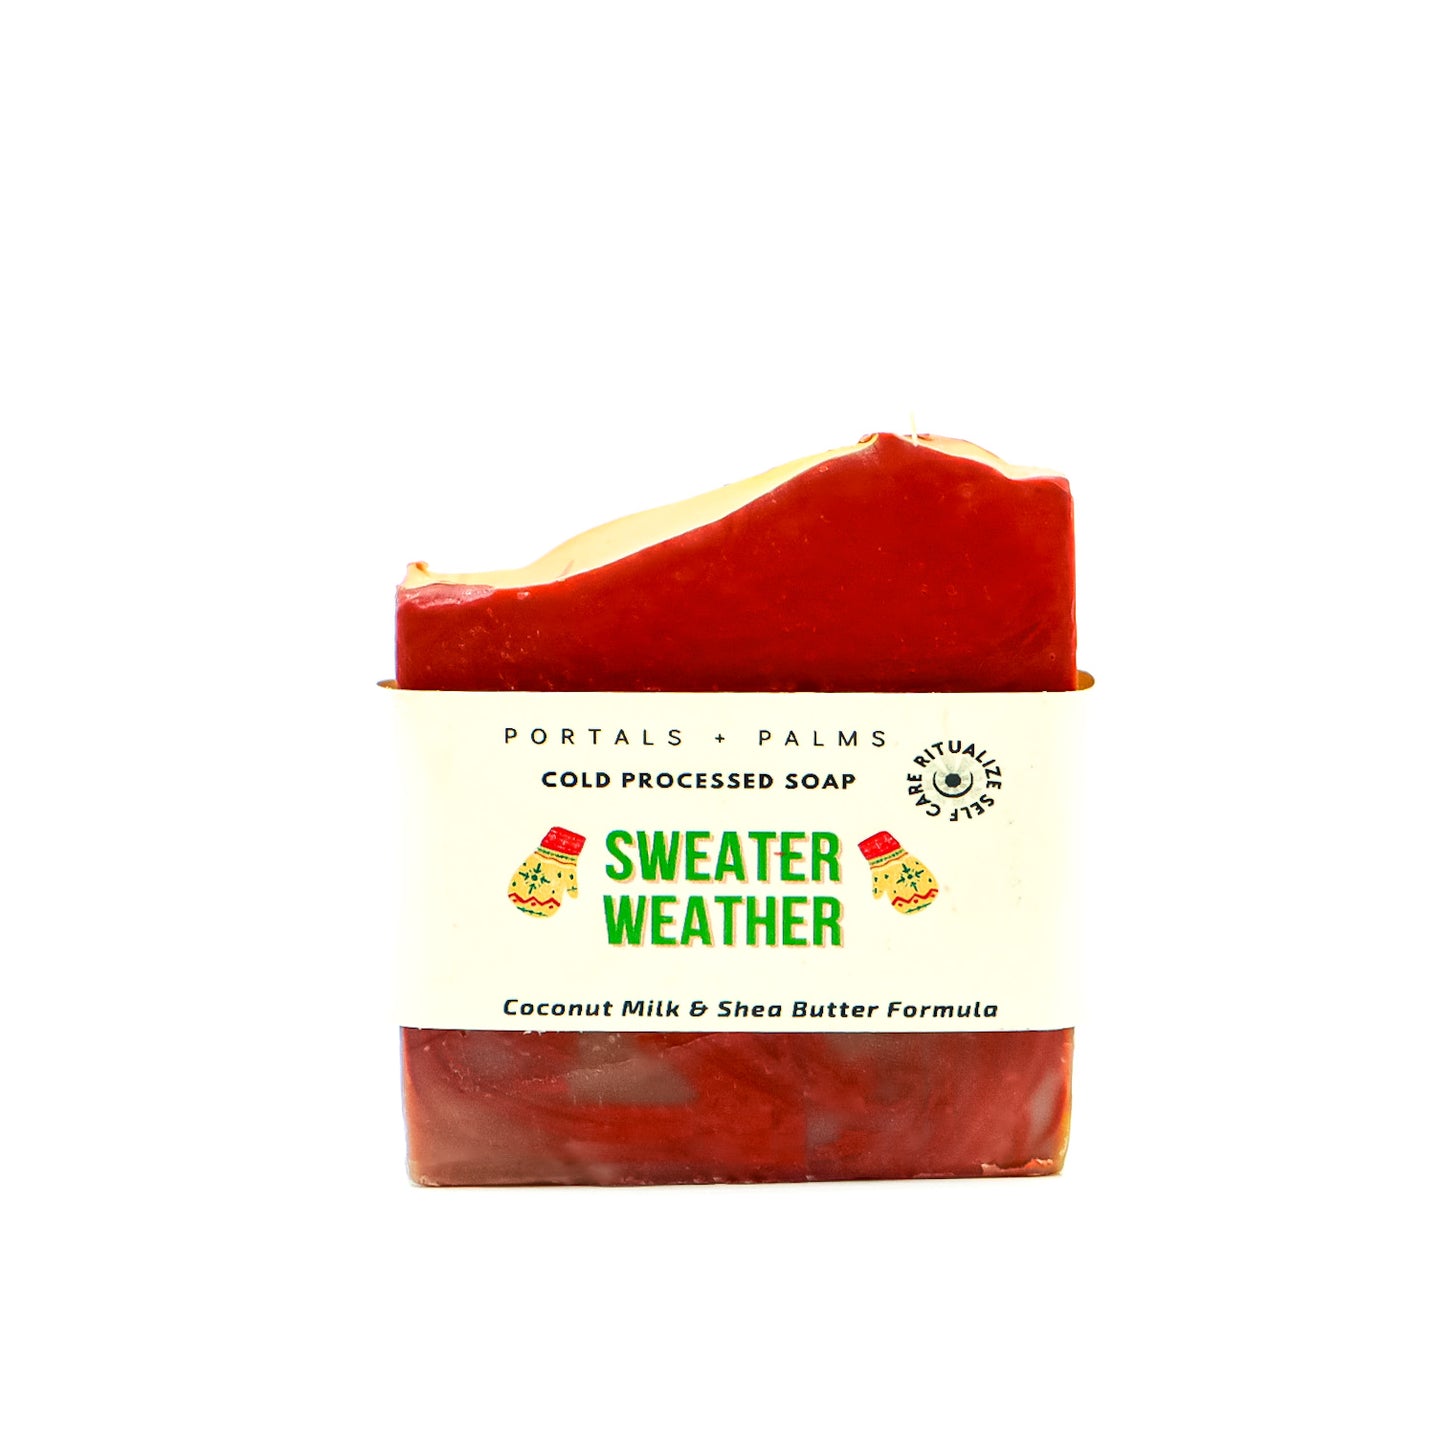 Sweater Weather Cold Processed Soap bar